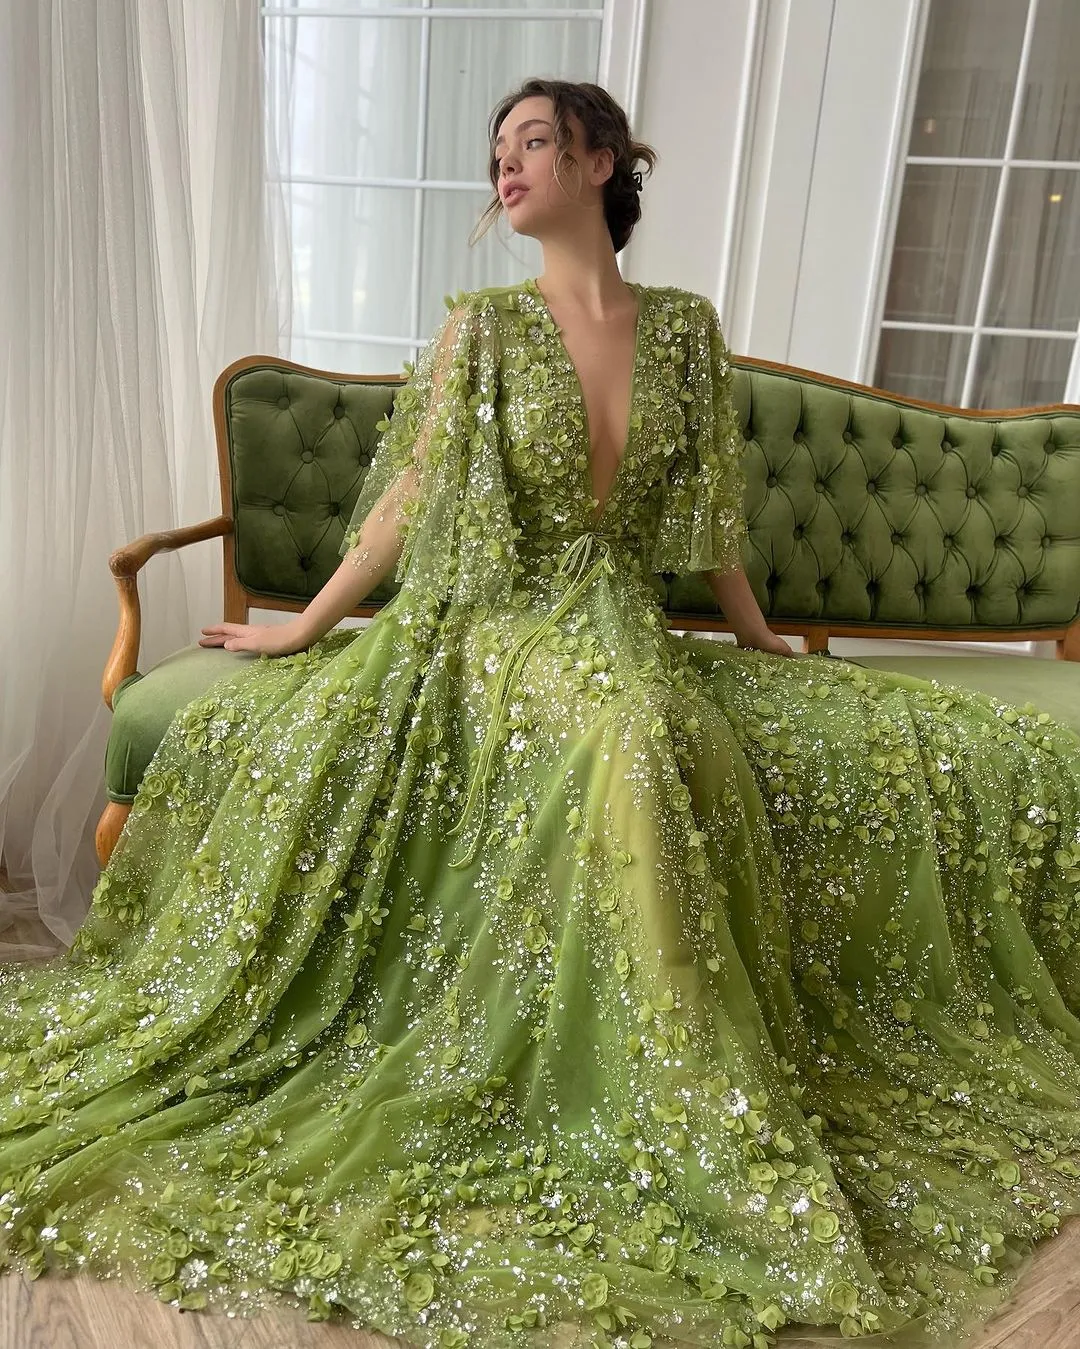 Green A Line Evening Dresses V Neck Long Sleeves High Neck Prom Dress 3D Flowers Beads Special Occasion Gowns